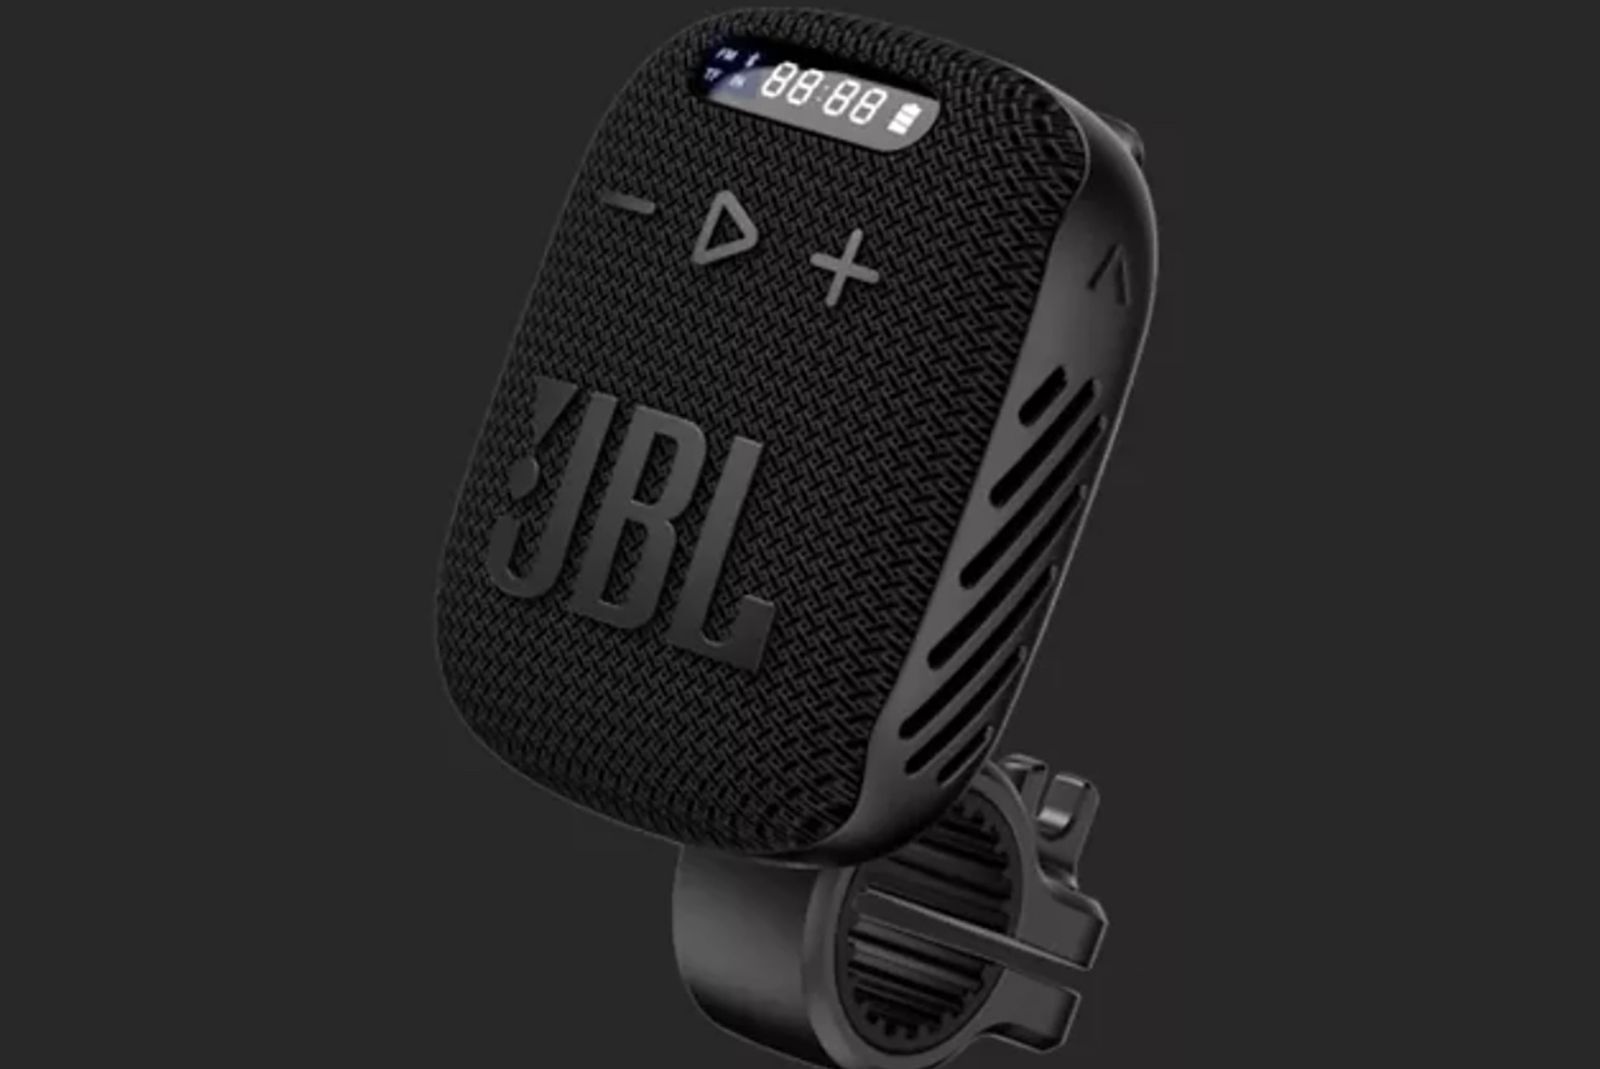 JBL rolls out several Bluetooth speakers and wireless earbuds at CES 2022 photo 4